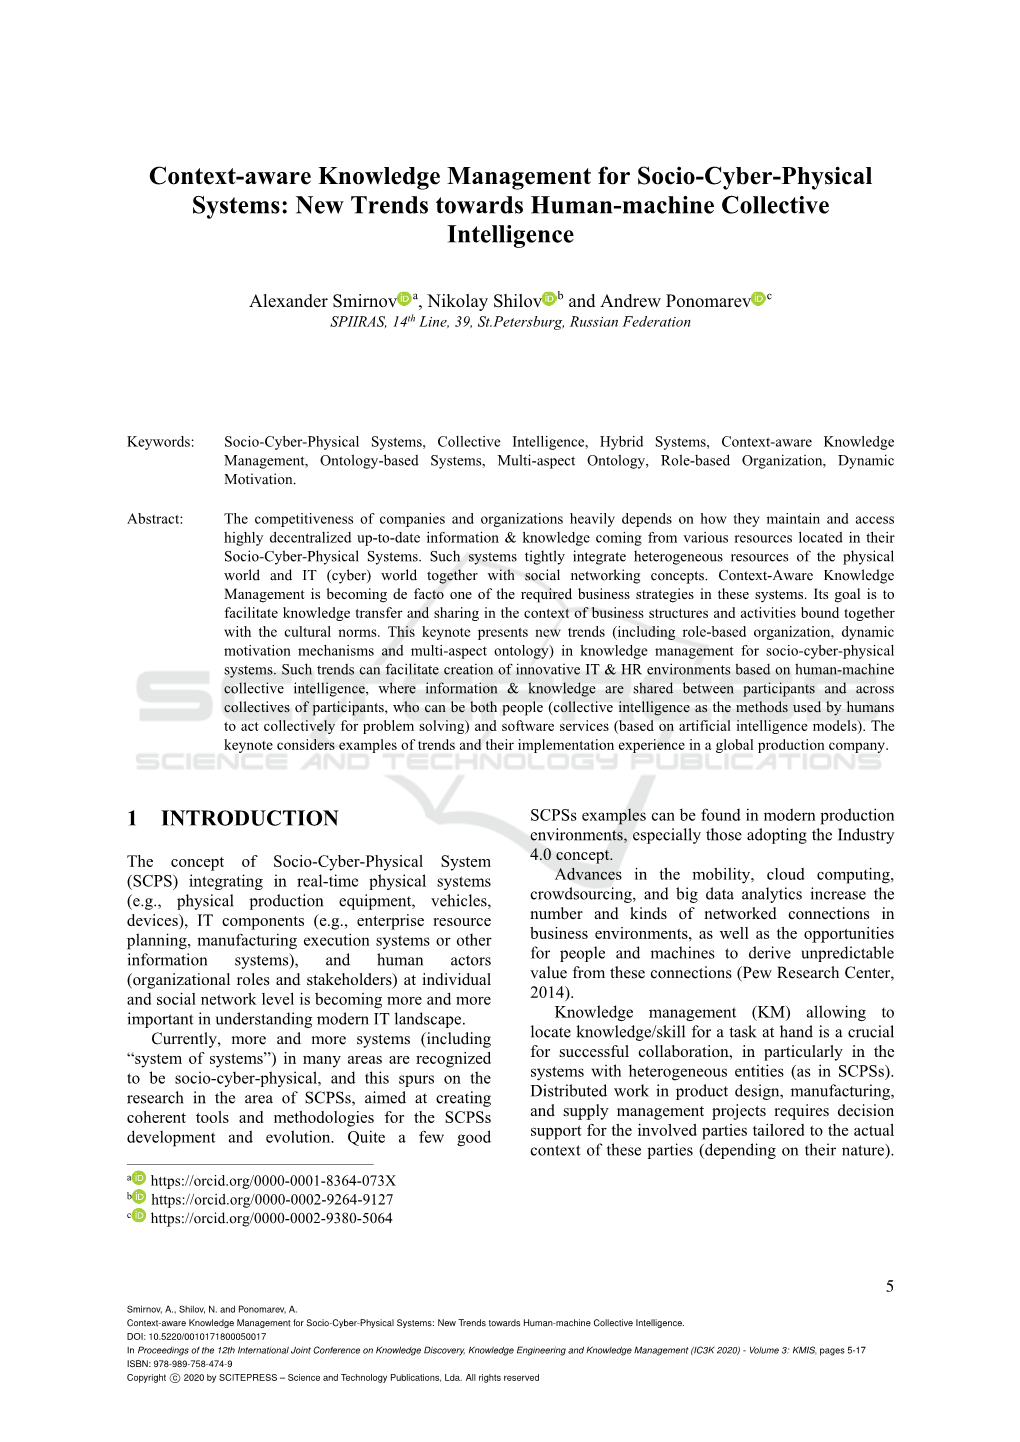 Context-Aware Knowledge Management for Socio-Cyber-Physical Systems: New Trends Towards Human-Machine Collective Intelligence